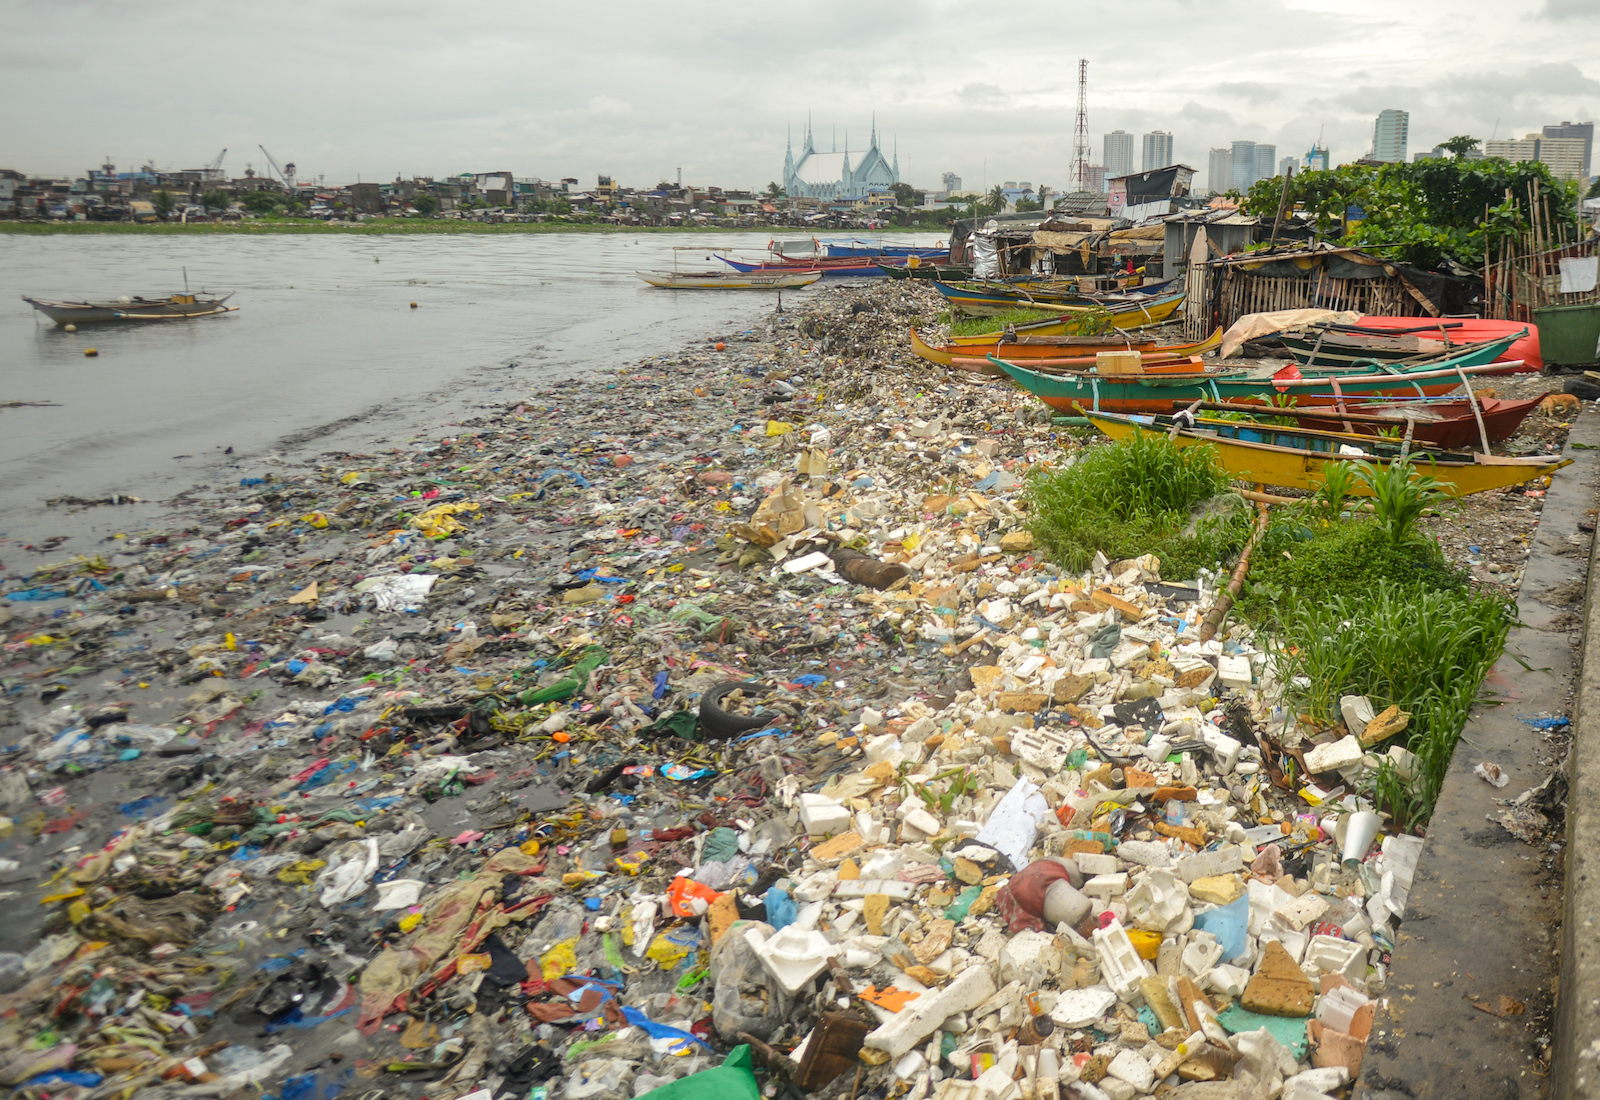 A riverbank littered with plastic and city in the background